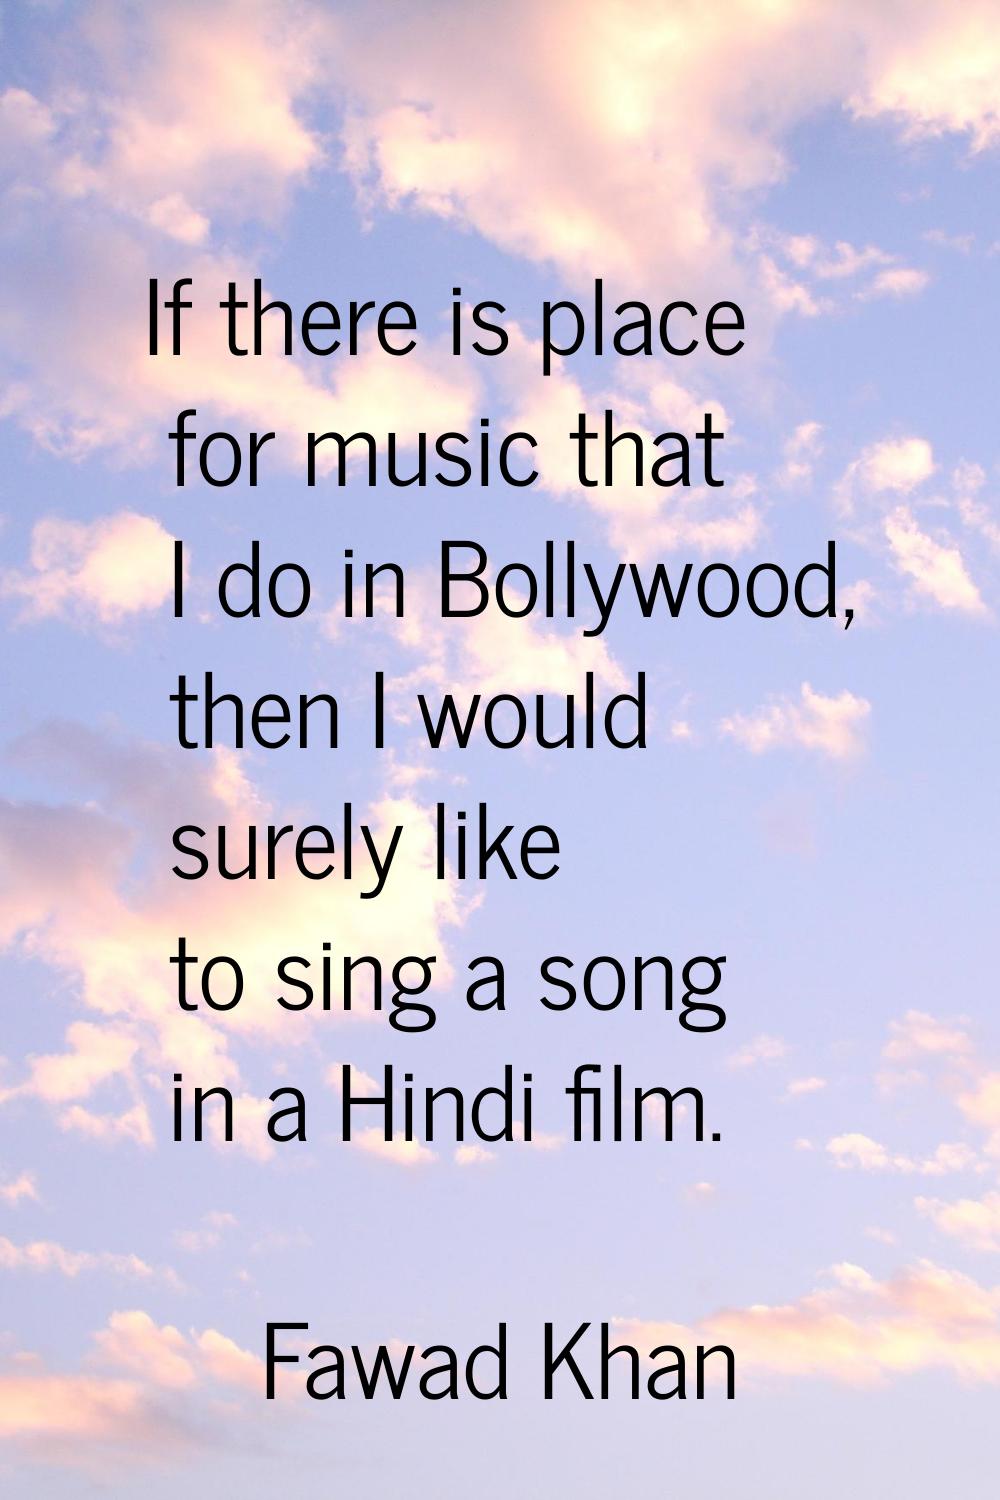 If there is place for music that I do in Bollywood, then I would surely like to sing a song in a Hi